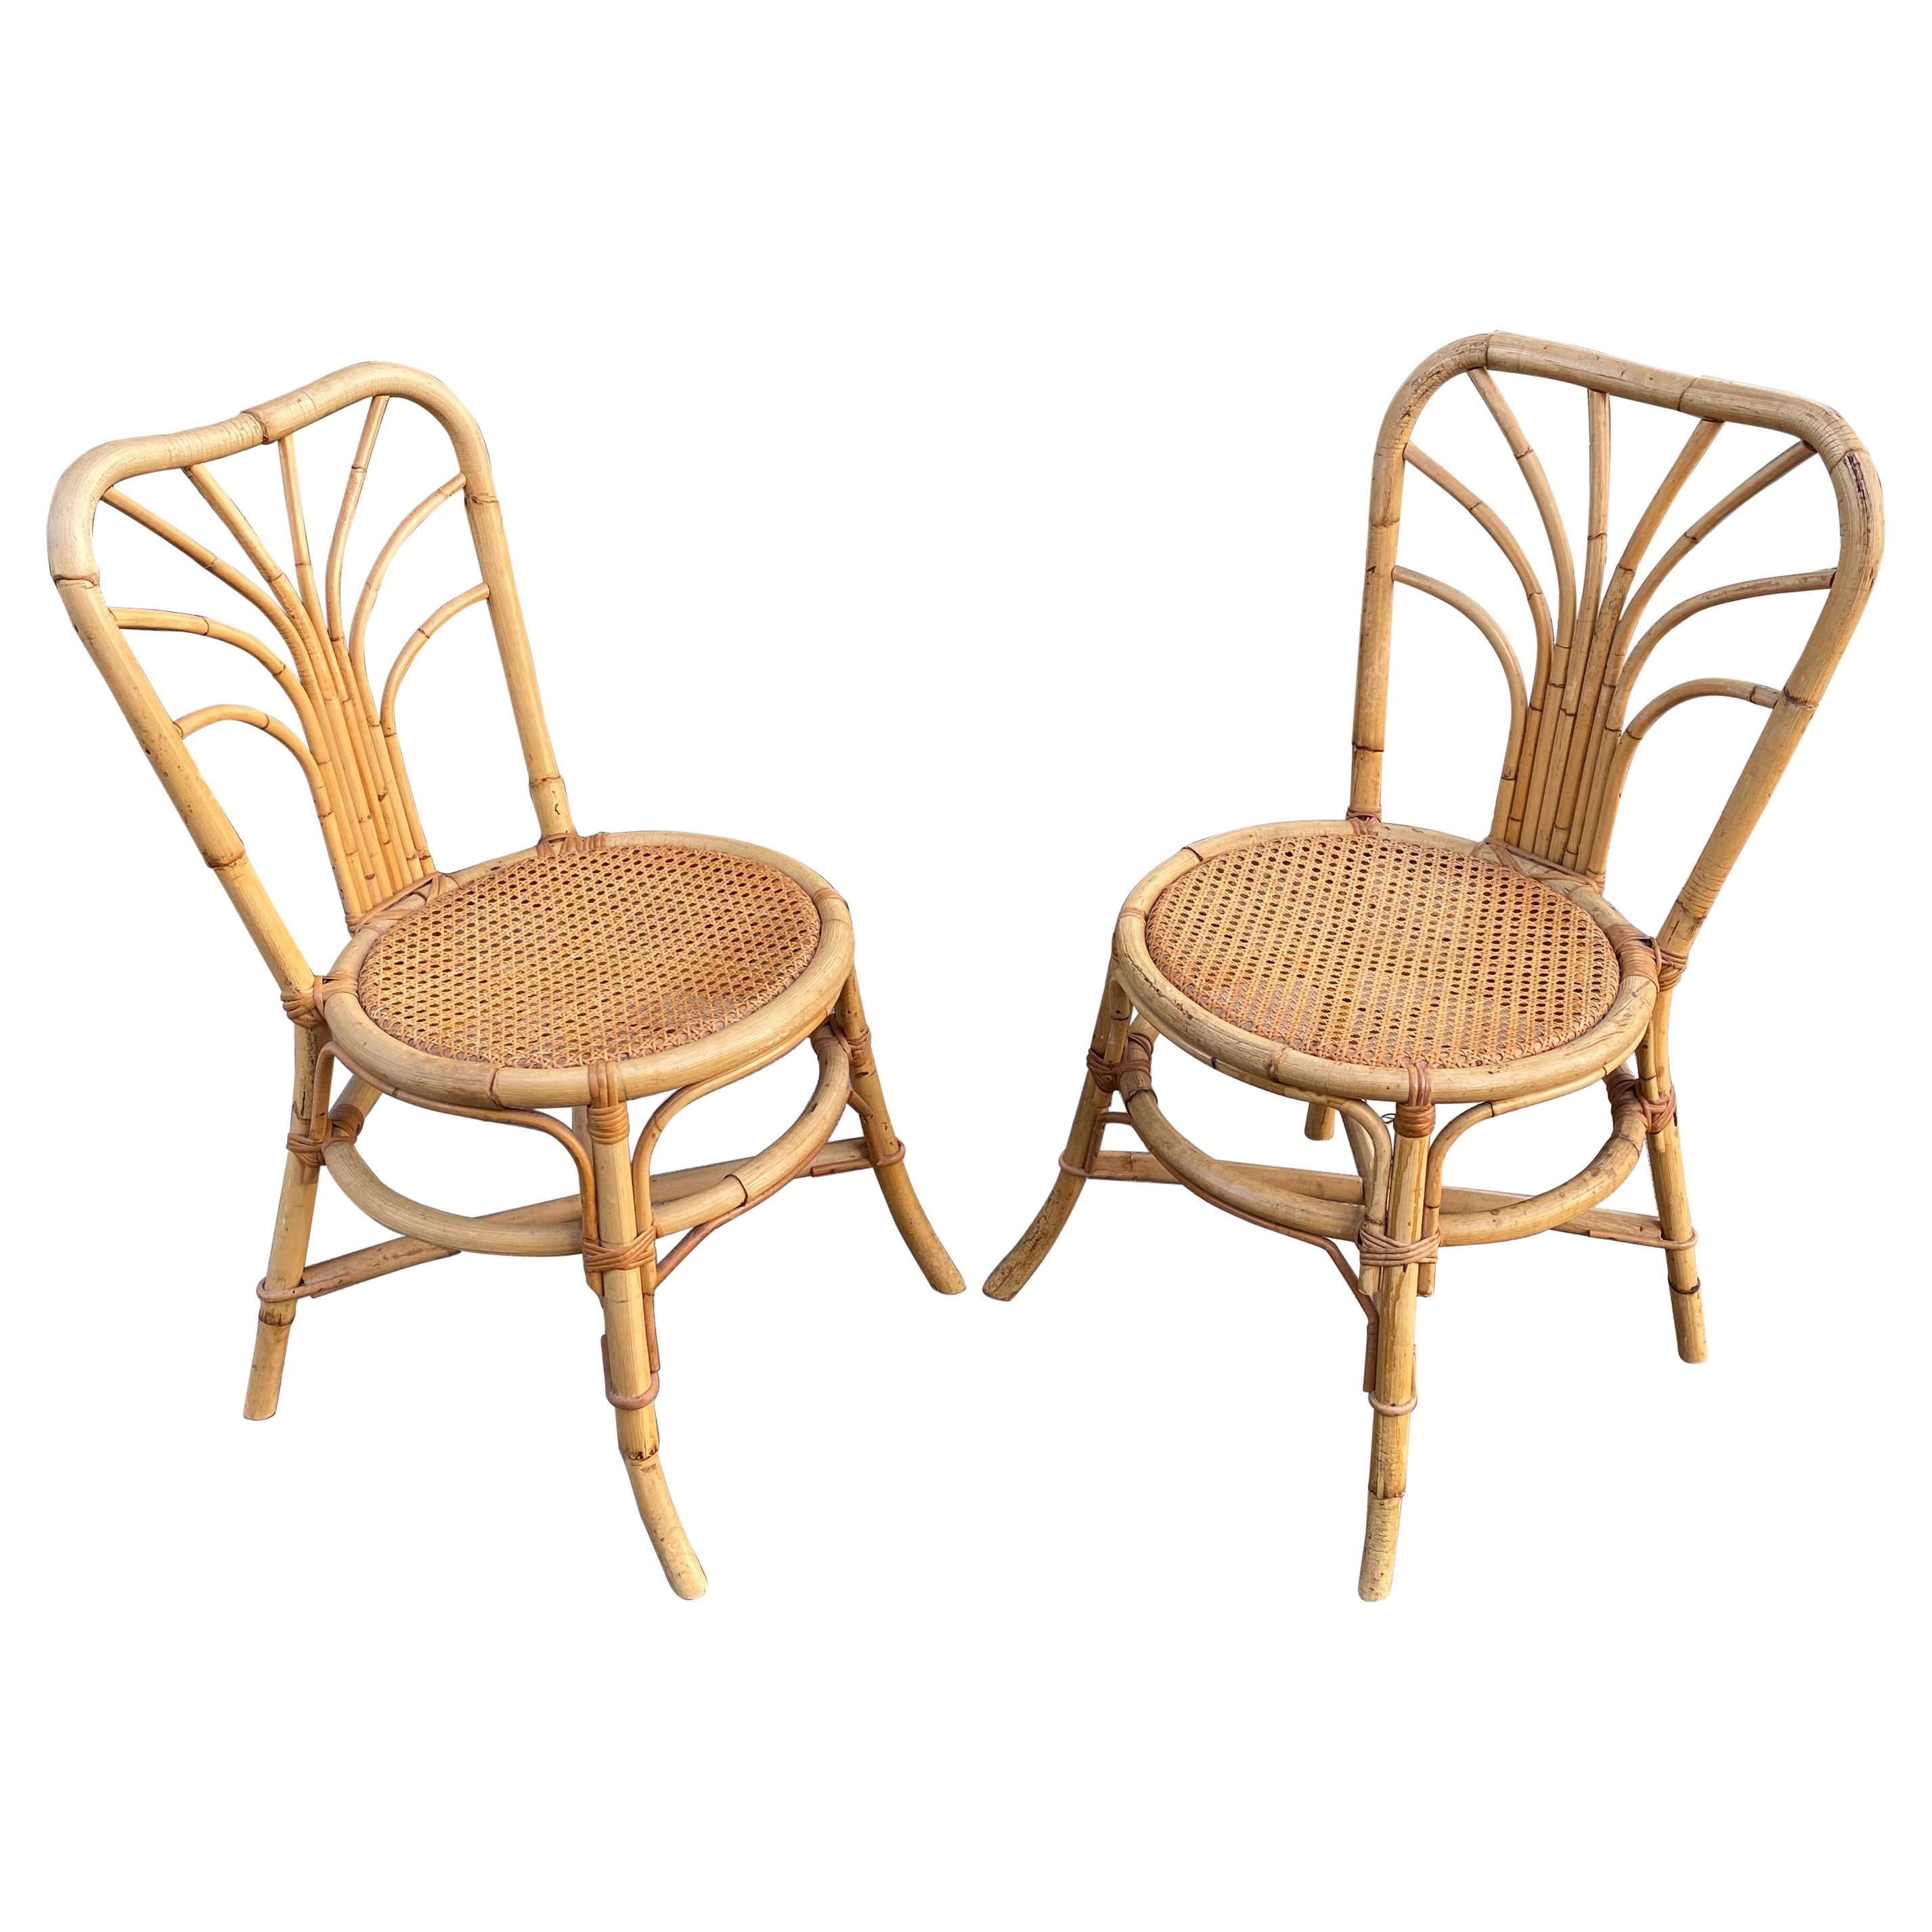 Two Bamboo Chairs, circa 1960 For Sale